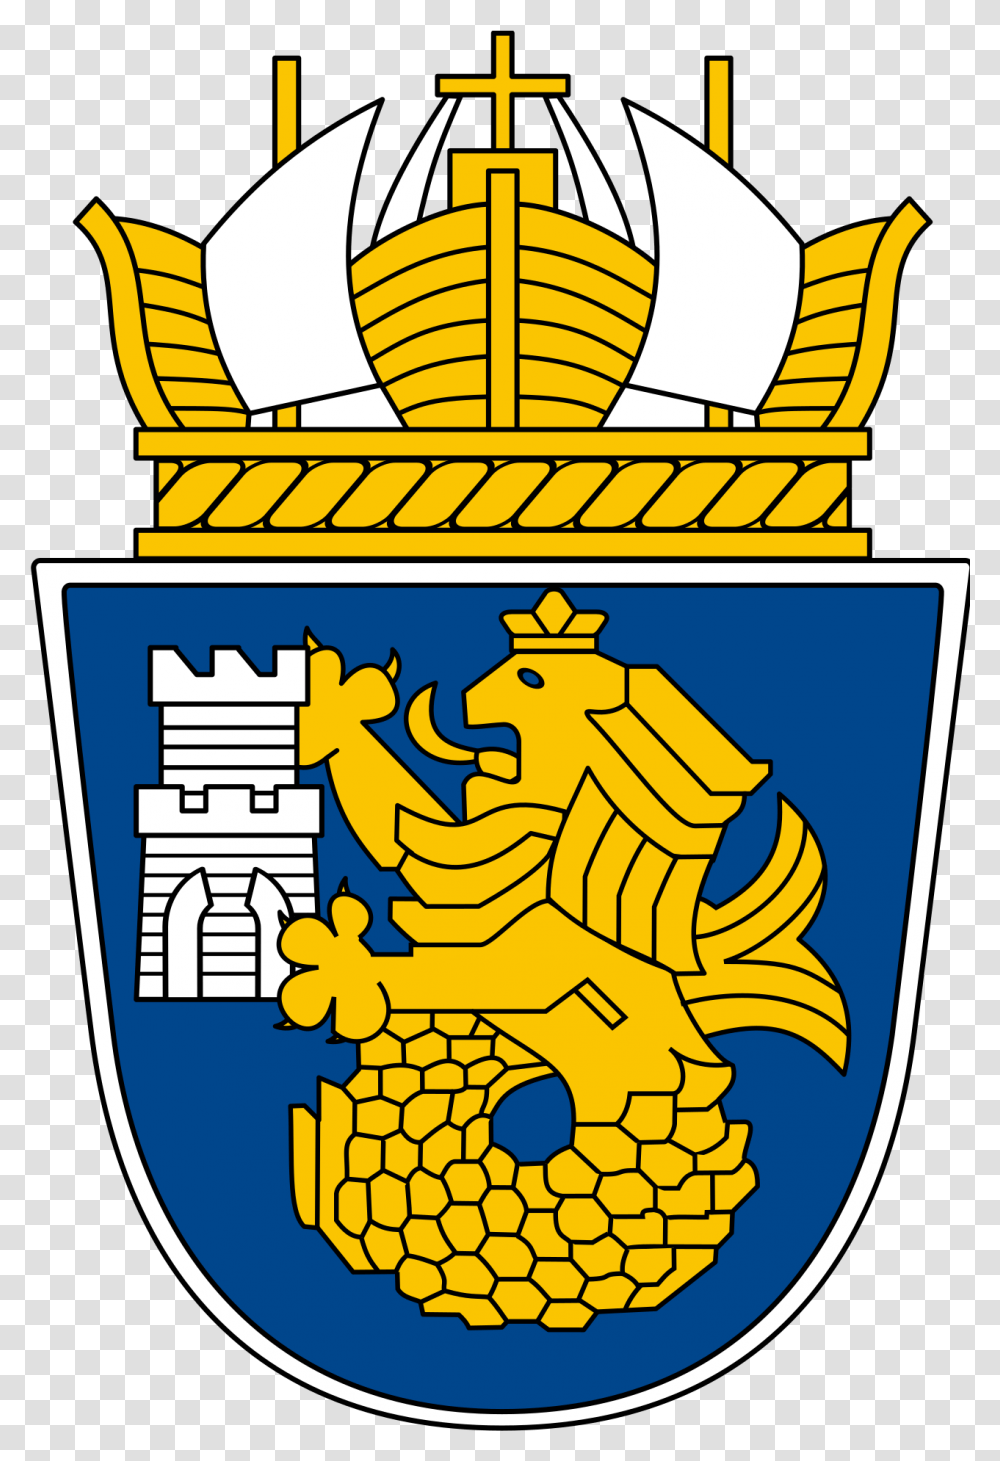 A Naval Crown In The Coat Of Arms City Burgas Burgas Flag, Armor, Symbol, Shield Transparent Png